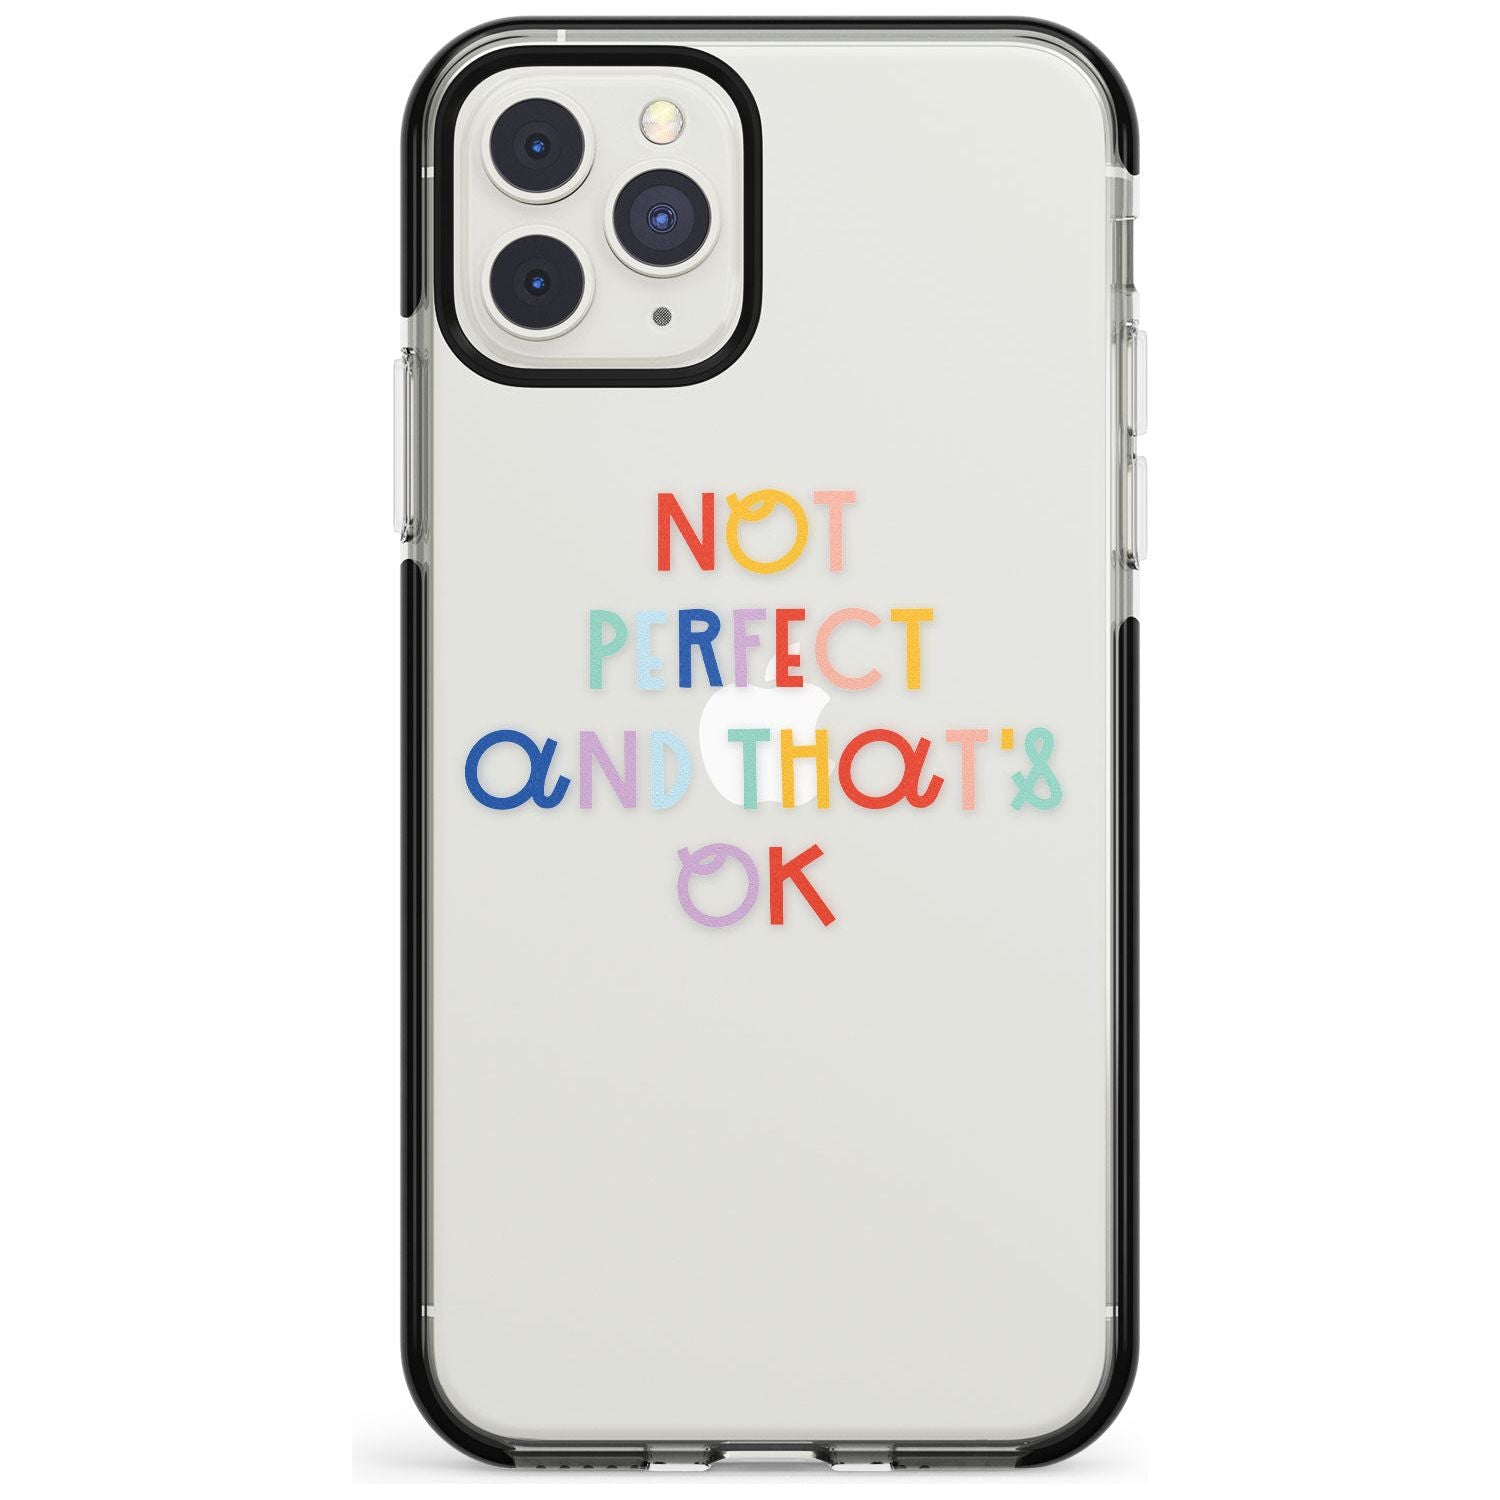 Not Perfect - Clear Black Impact Phone Case for iPhone 11 Pro Max